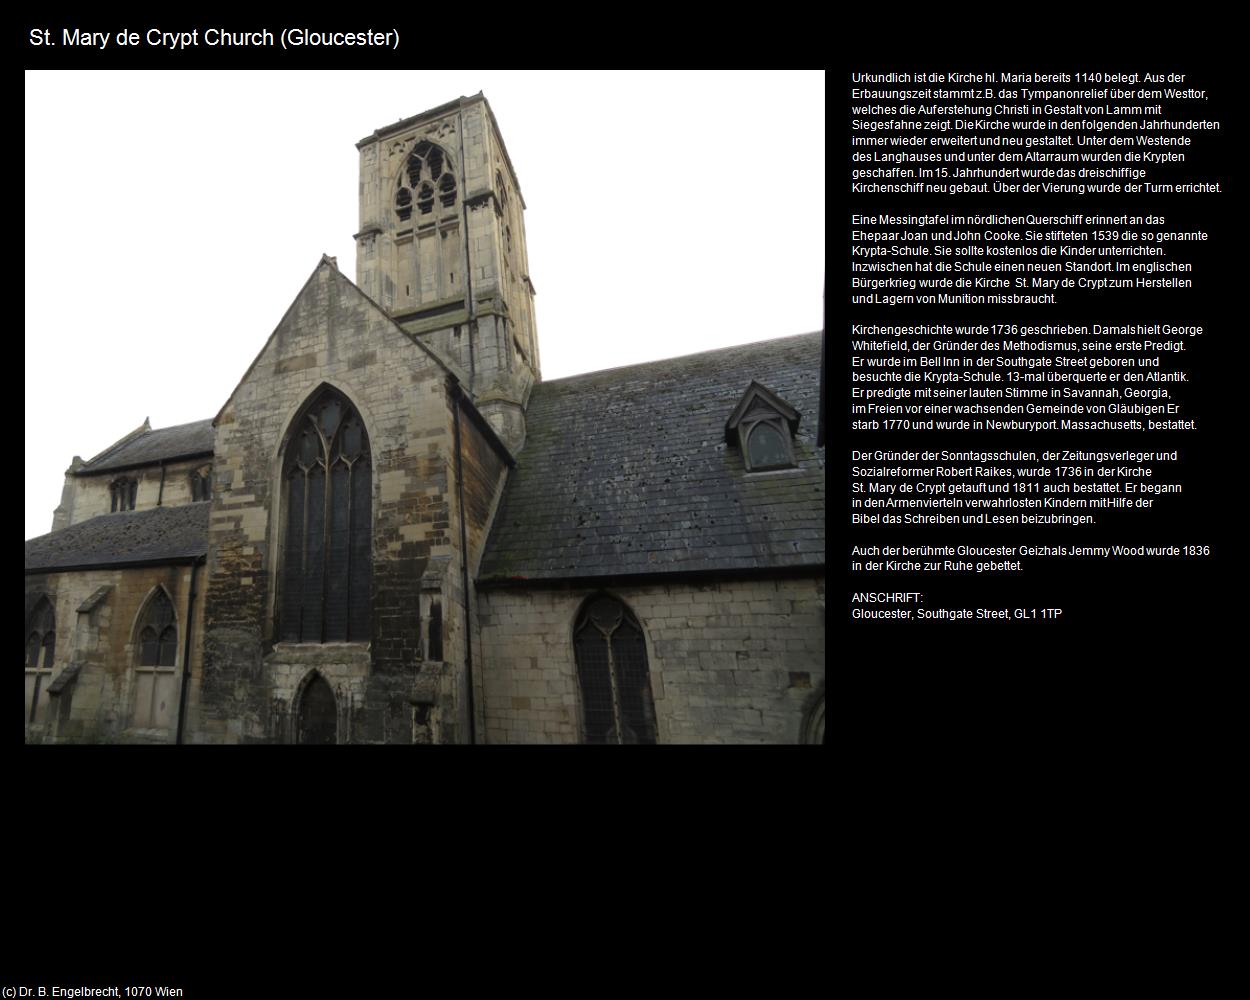 St. Mary de Crypt Church (Gloucester, England) in Kulturatlas-ENGLAND und WALES